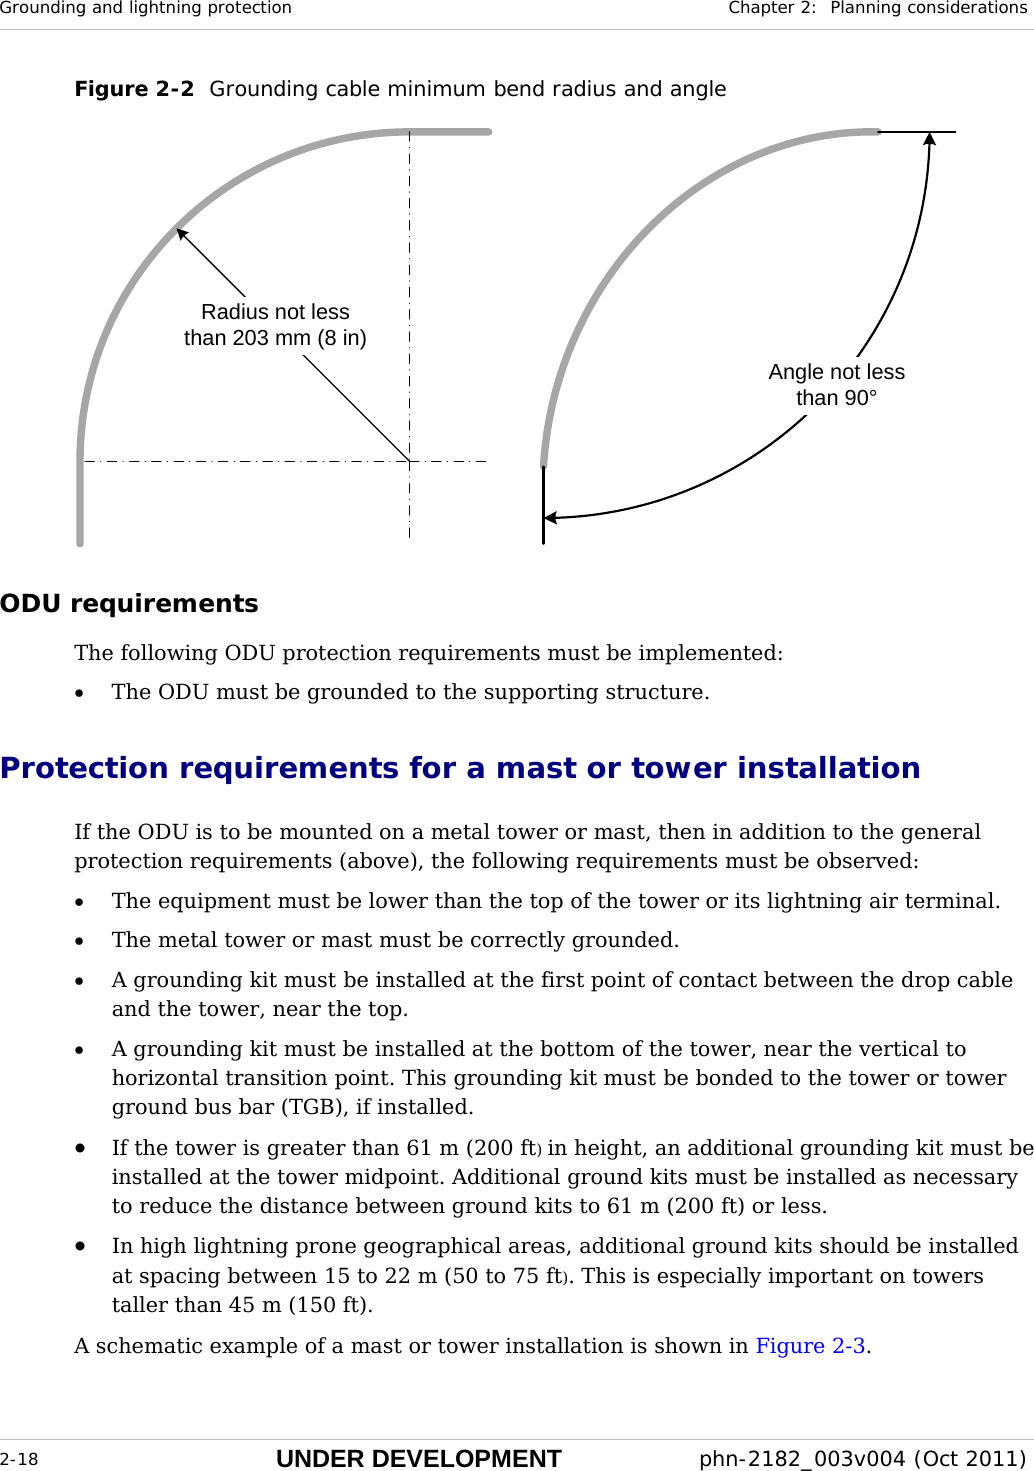 Grounding and lightning protection  Chapter 2:  Planning considerations  2-18 UNDER DEVELOPMENT  phn-2182_003v004 (Oct 2011)  Figure 2-2  Grounding cable minimum bend radius and angle Radius not lessthan 203 mm (8 in)Angle not lessthan 90° ODU requirements The following ODU protection requirements must be implemented: • The ODU must be grounded to the supporting structure. Protection requirements for a mast or tower installation If the ODU is to be mounted on a metal tower or mast, then in addition to the general protection requirements (above), the following requirements must be observed: • The equipment must be lower than the top of the tower or its lightning air terminal. • The metal tower or mast must be correctly grounded. • A grounding kit must be installed at the first point of contact between the drop cable and the tower, near the top. • A grounding kit must be installed at the bottom of the tower, near the vertical to horizontal transition point. This grounding kit must be bonded to the tower or tower ground bus bar (TGB), if installed. • If the tower is greater than 61 m (200 ft) in height, an additional grounding kit must be installed at the tower midpoint. Additional ground kits must be installed as necessary to reduce the distance between ground kits to 61 m (200 ft) or less. • In high lightning prone geographical areas, additional ground kits should be installed at spacing between 15 to 22 m (50 to 75 ft). This is especially important on towers taller than 45 m (150 ft).  A schematic example of a mast or tower installation is shown in Figure 2-3. 